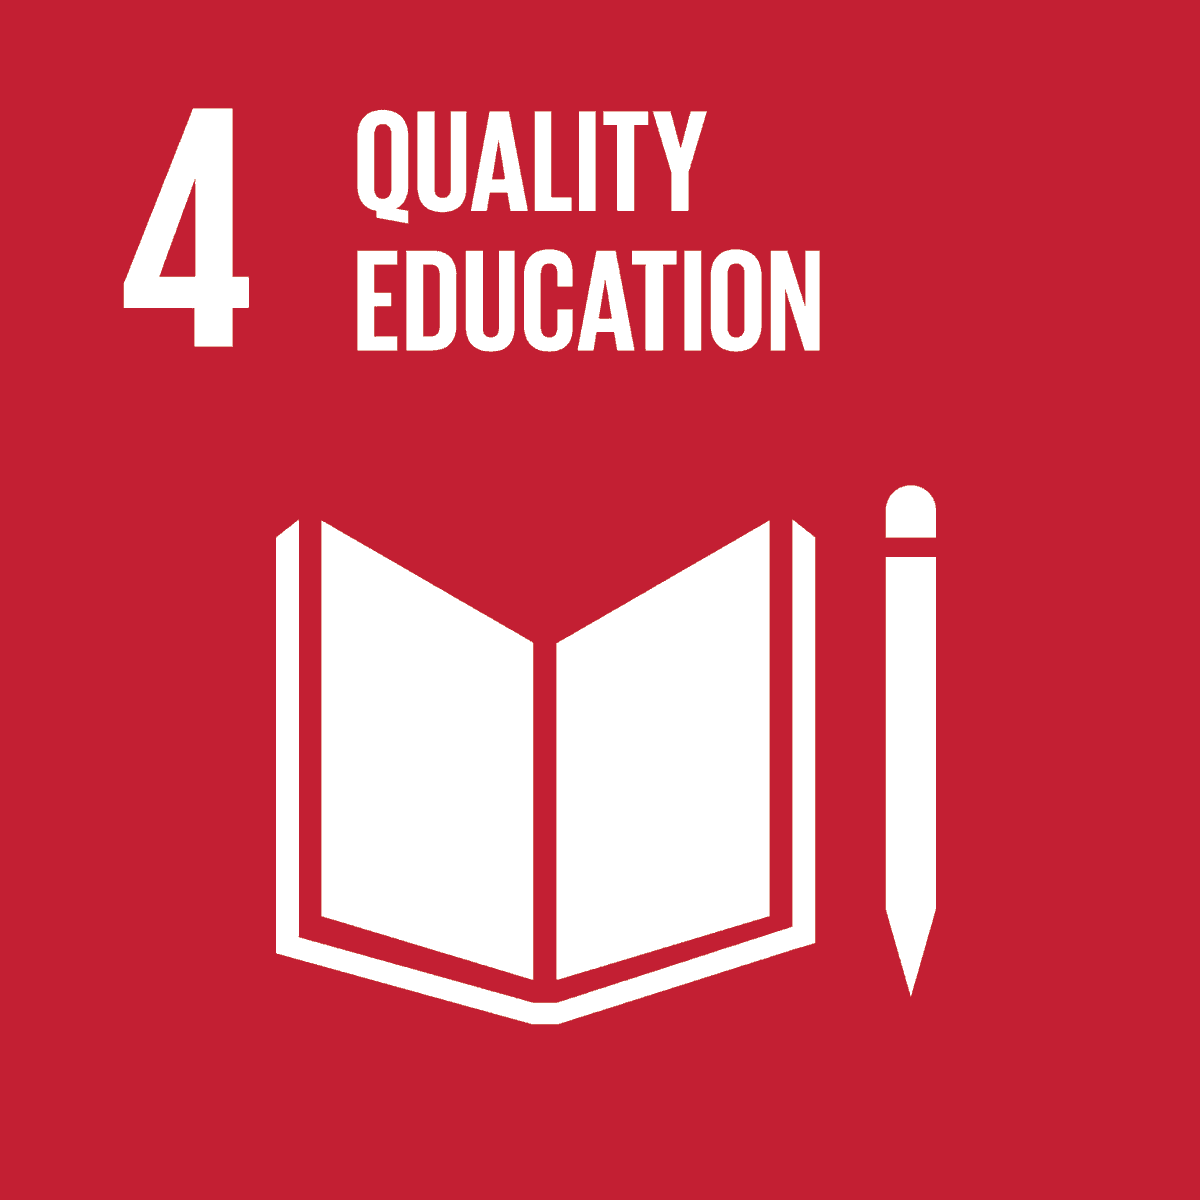 Education which is a #human #right is #SDG4